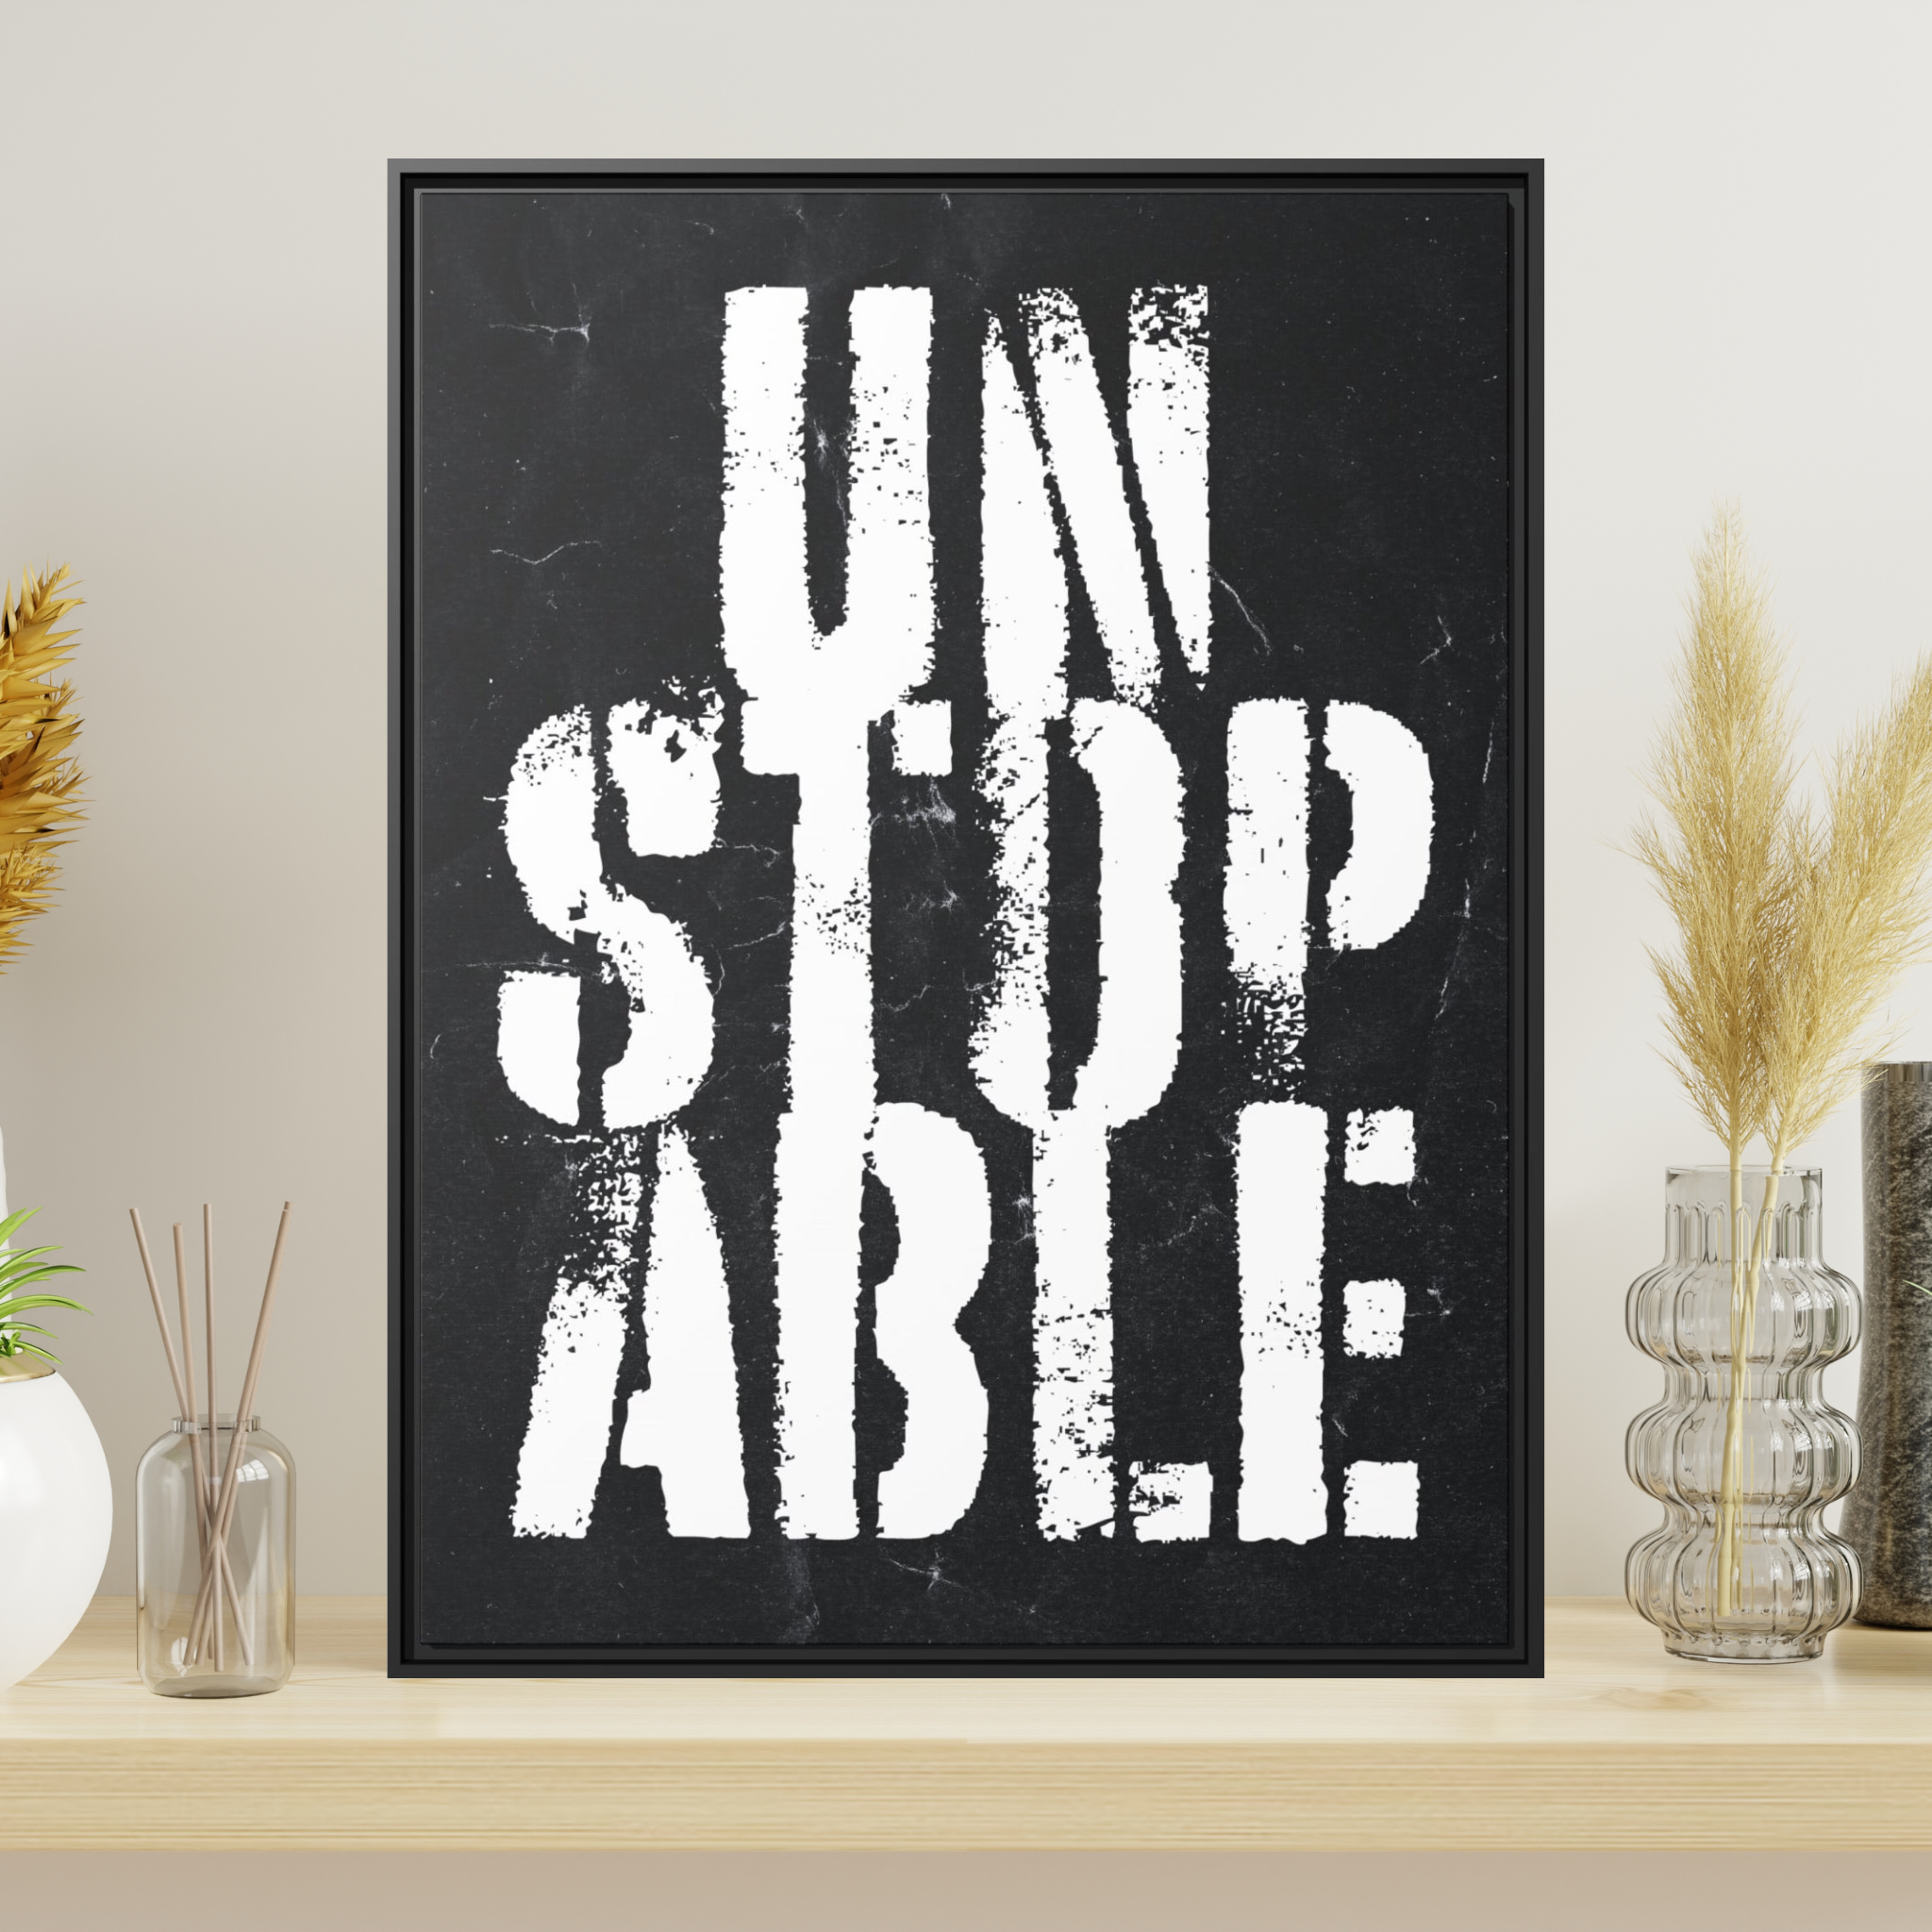 Unstoppable Wall Art - The Design Station